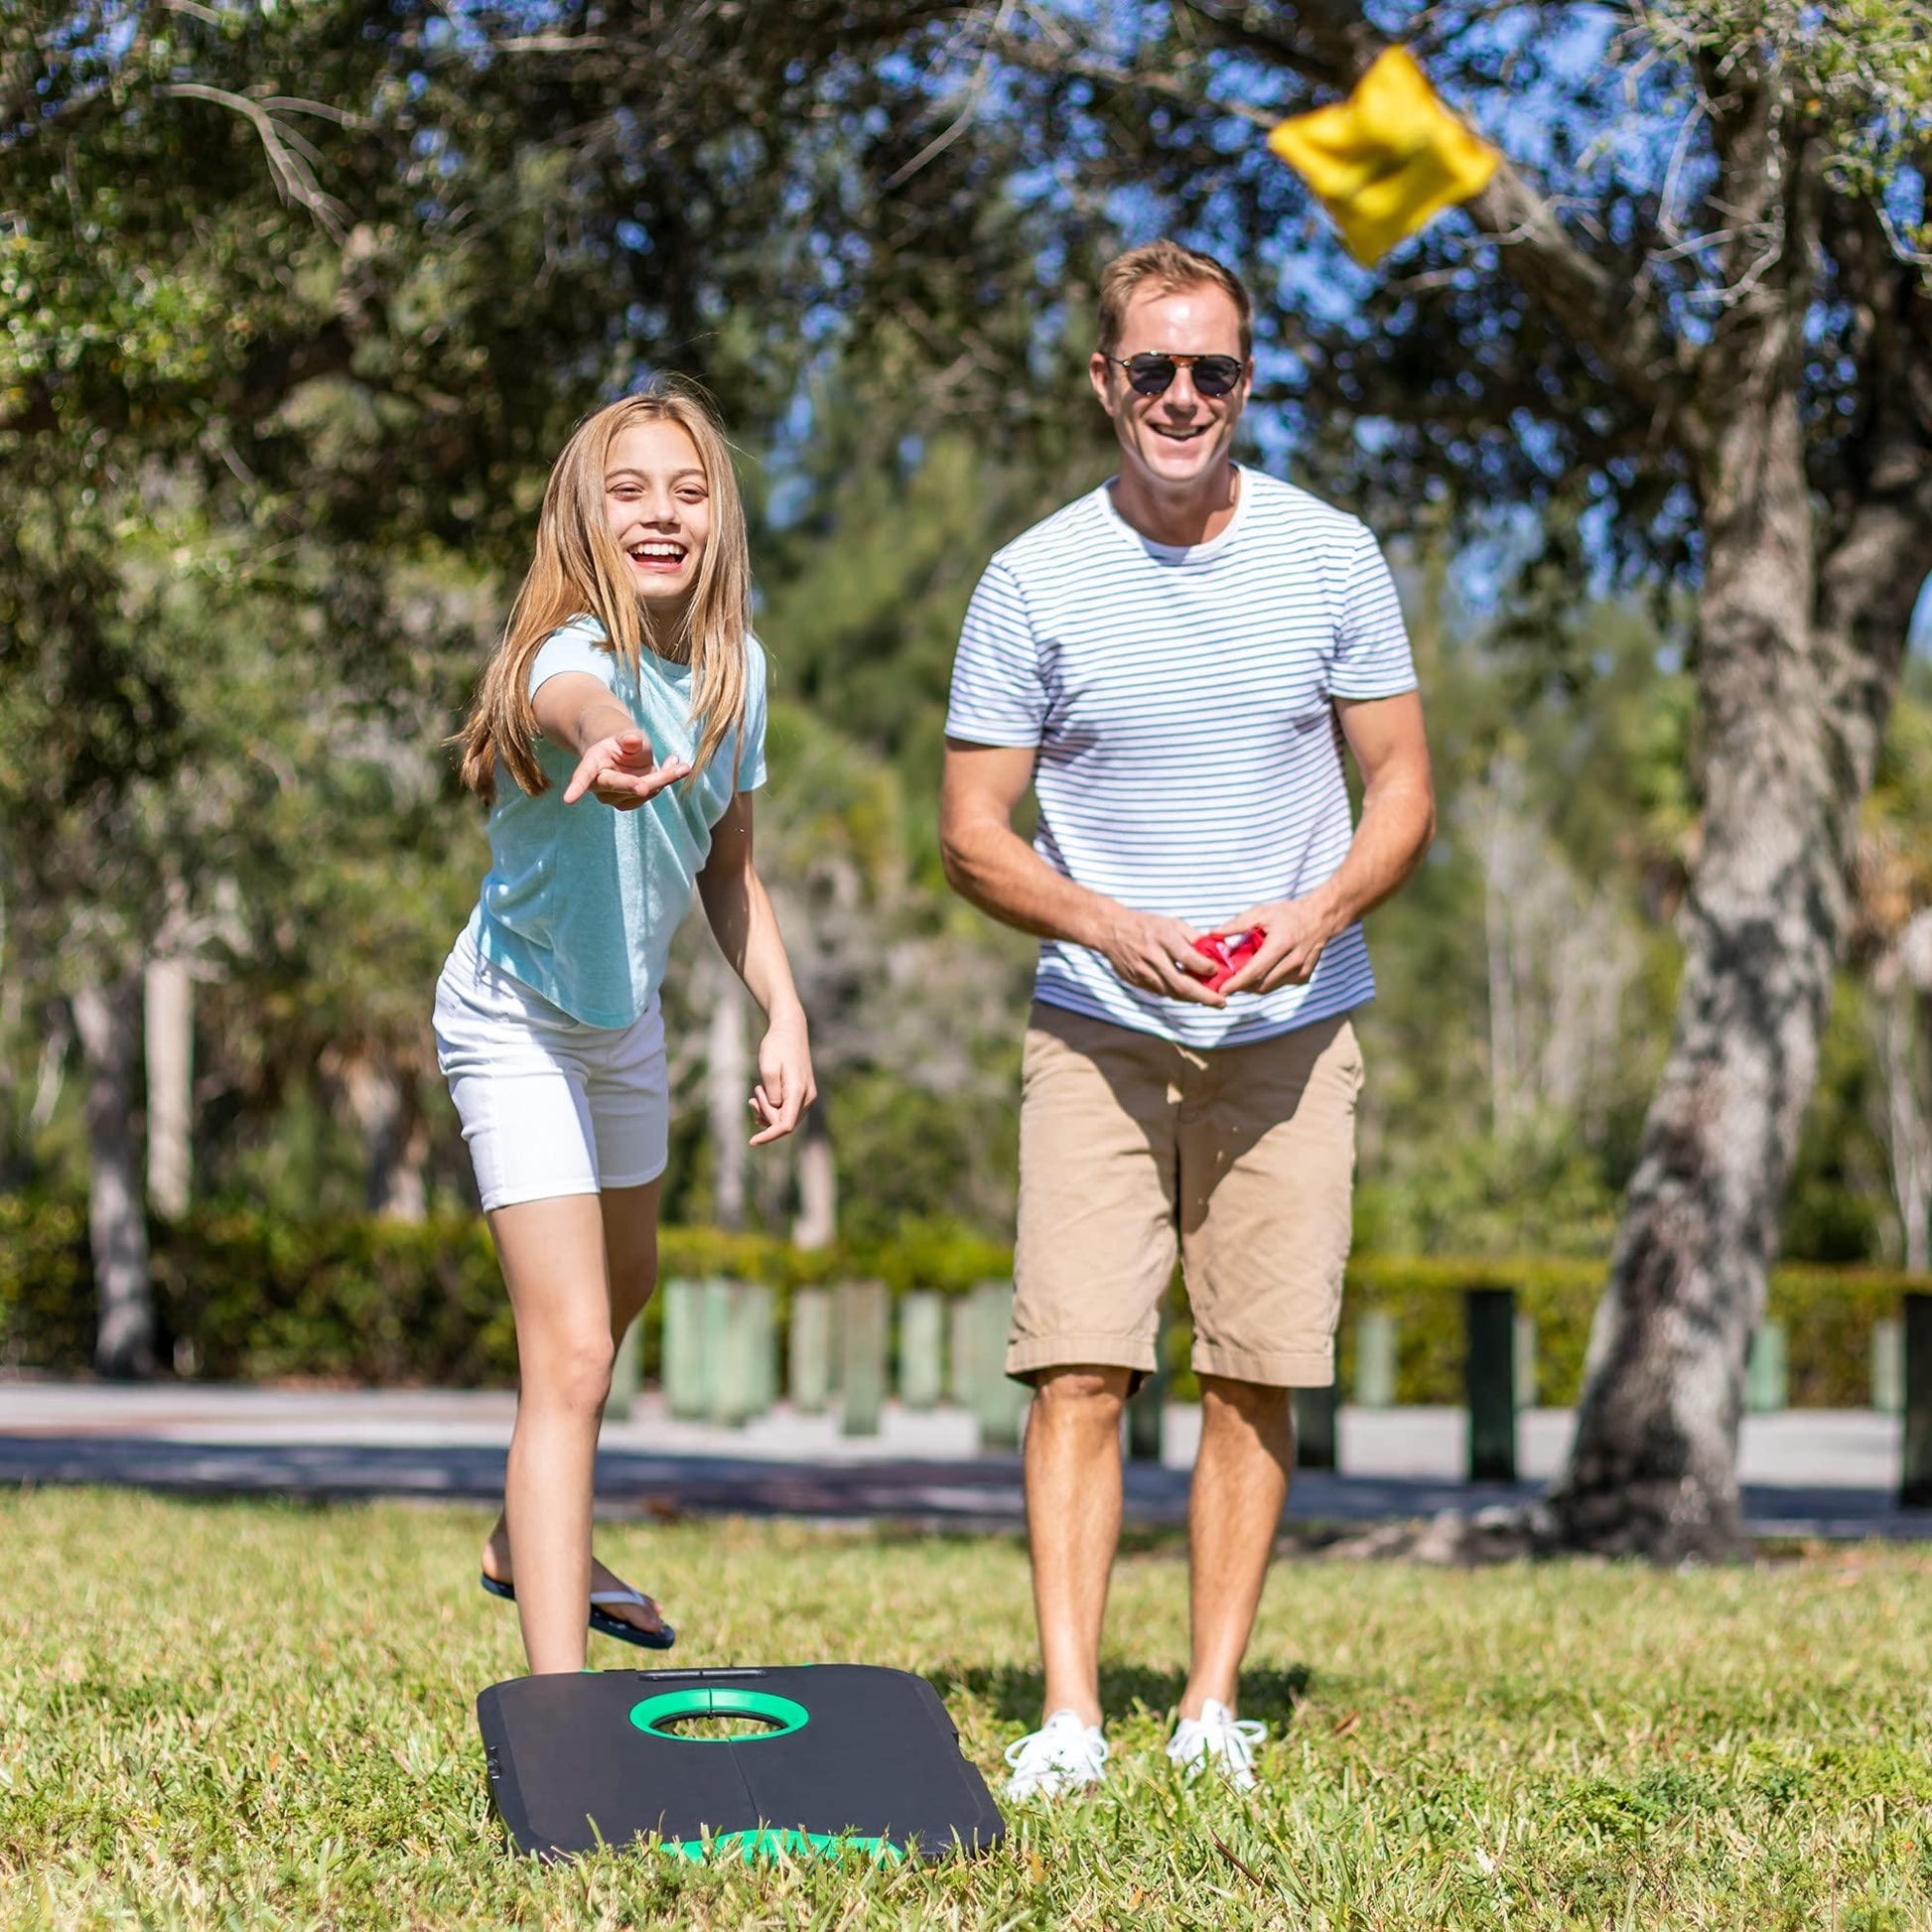 EastPoint Sports Go! Gater Corn Hole Outdoor Game - 24" x 18" Junior Size Portable Waterproof Bean Bag Toss Set - Includes 8 Cornhole Bean Bags - CookCave